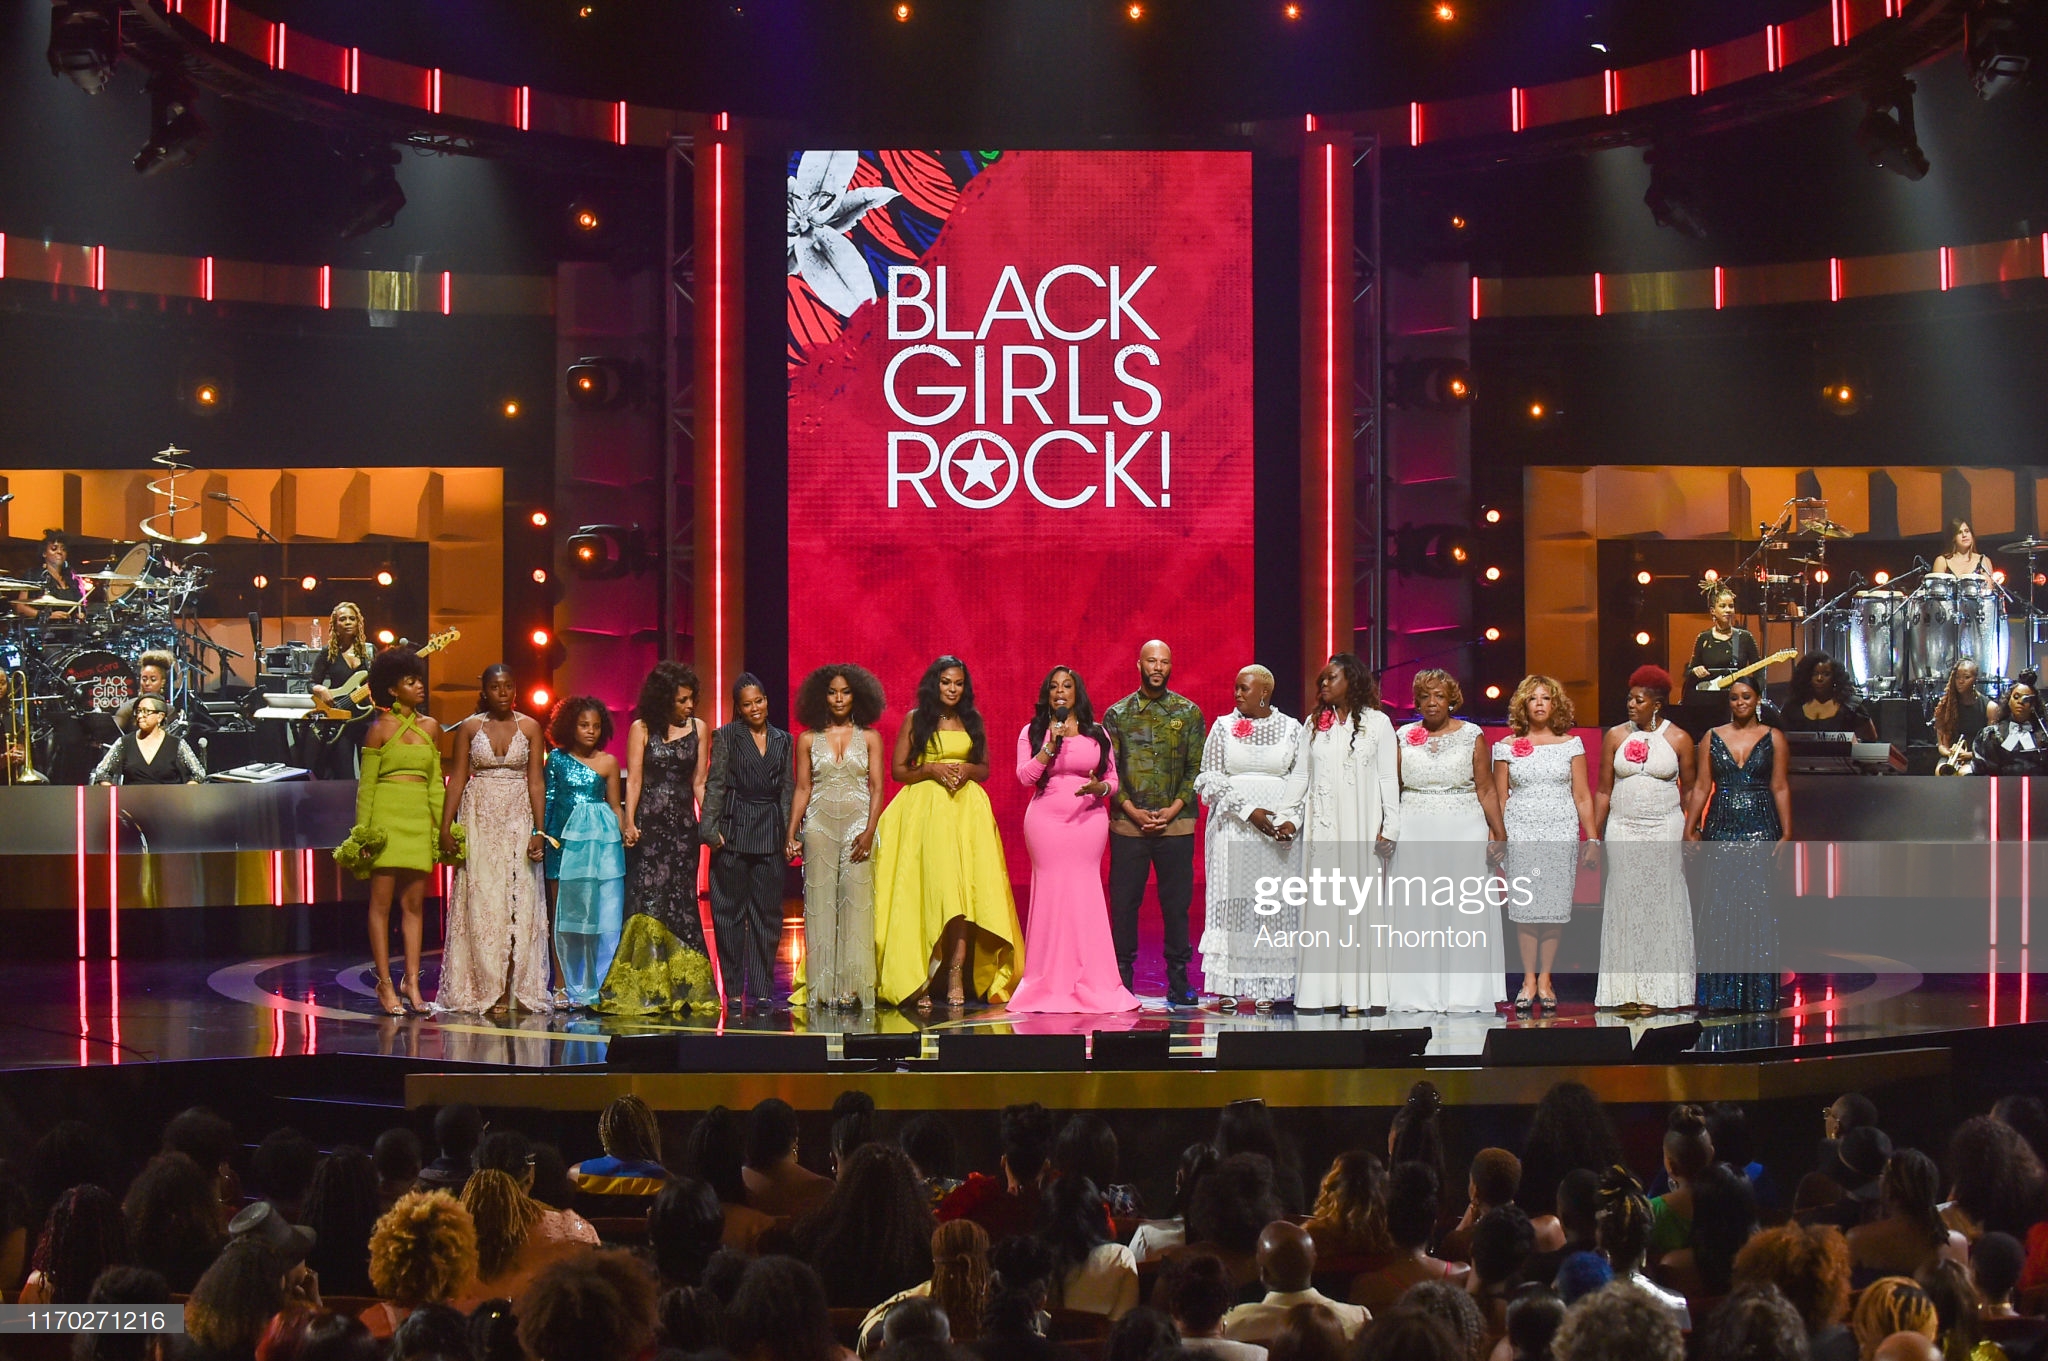 NEWARK, NEW JERSEY - AUGUST 25: Performers and Honorees onstage, including Debra Chase Martin, Regina King, Angela Bassett, Beverly Bond, Niecy Nash and Common at NJ Performing Arts Center on August 25, 2019 in Newark, New Jersey. (Photo by Aaron J. Thornton/WireImage)